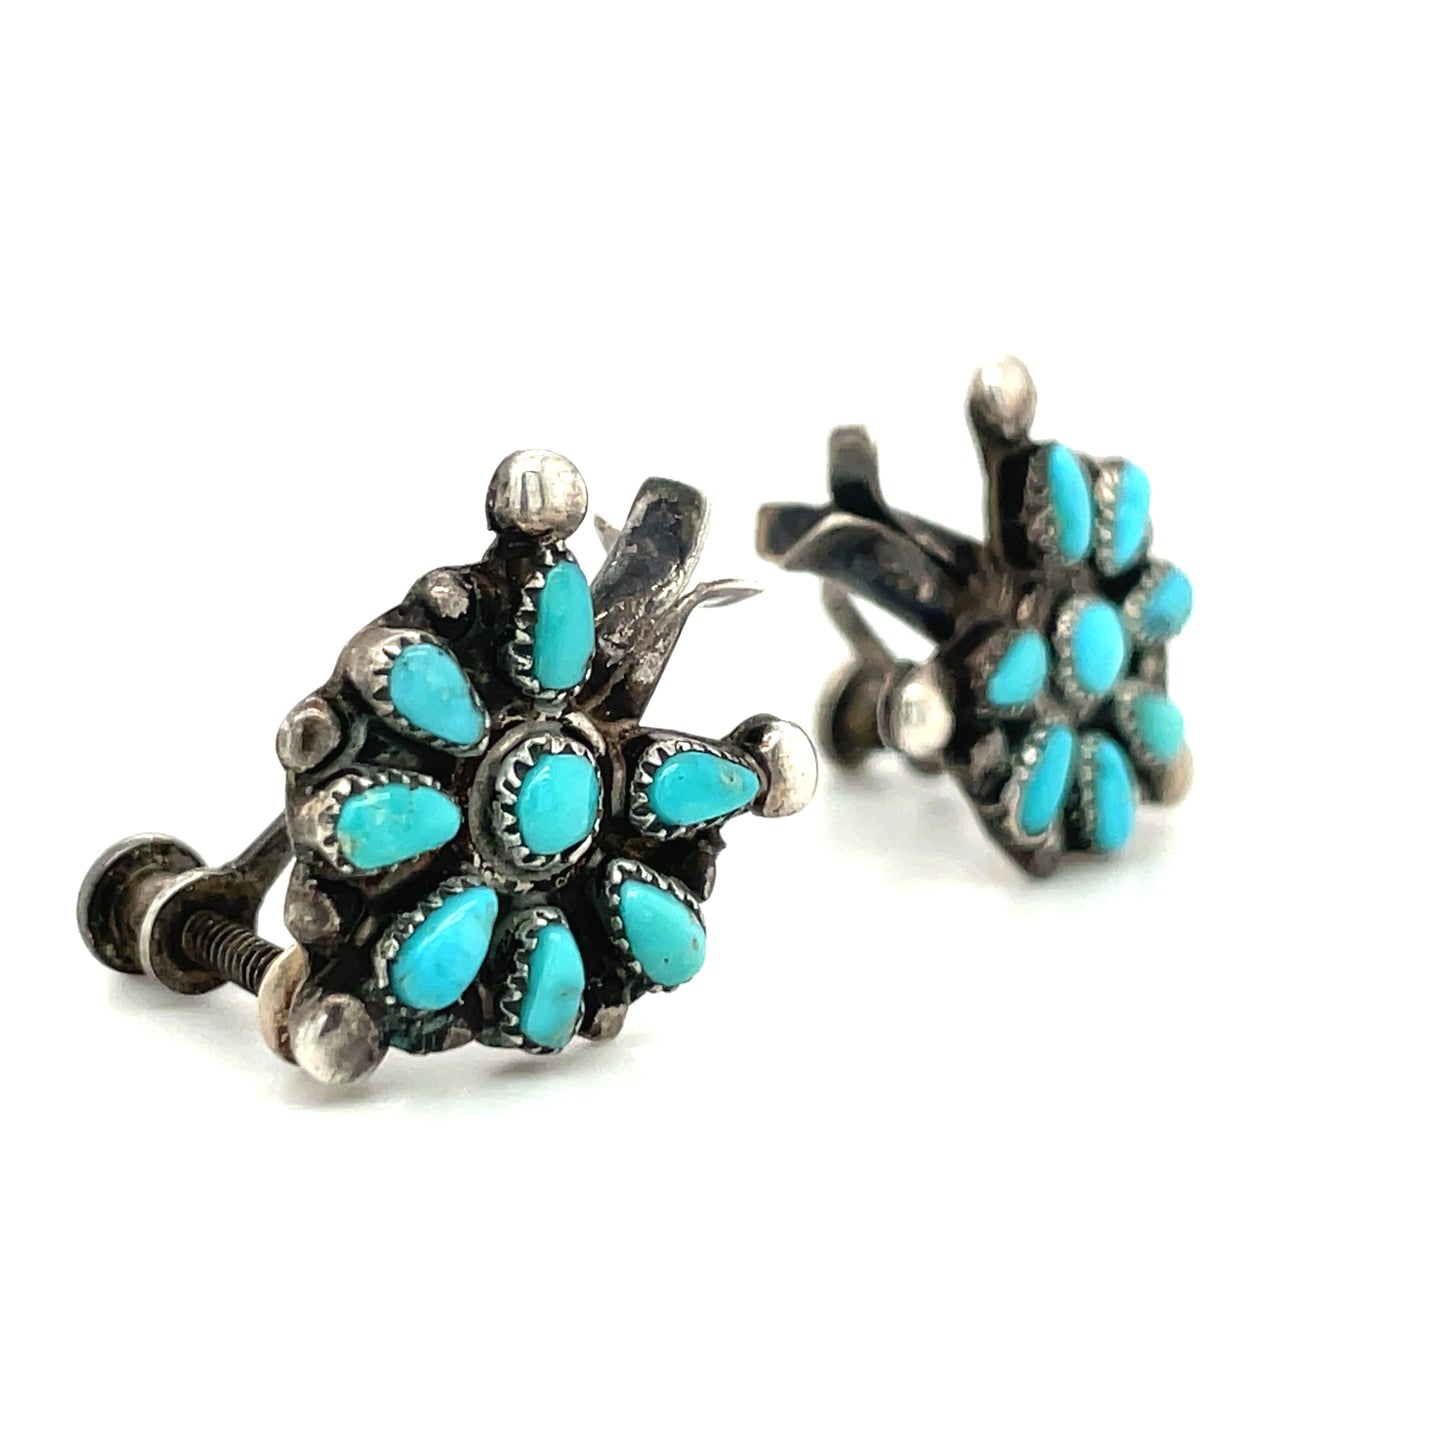 Vintage Southwestern Sterling Silver and Turquoise Screw Back Earrings